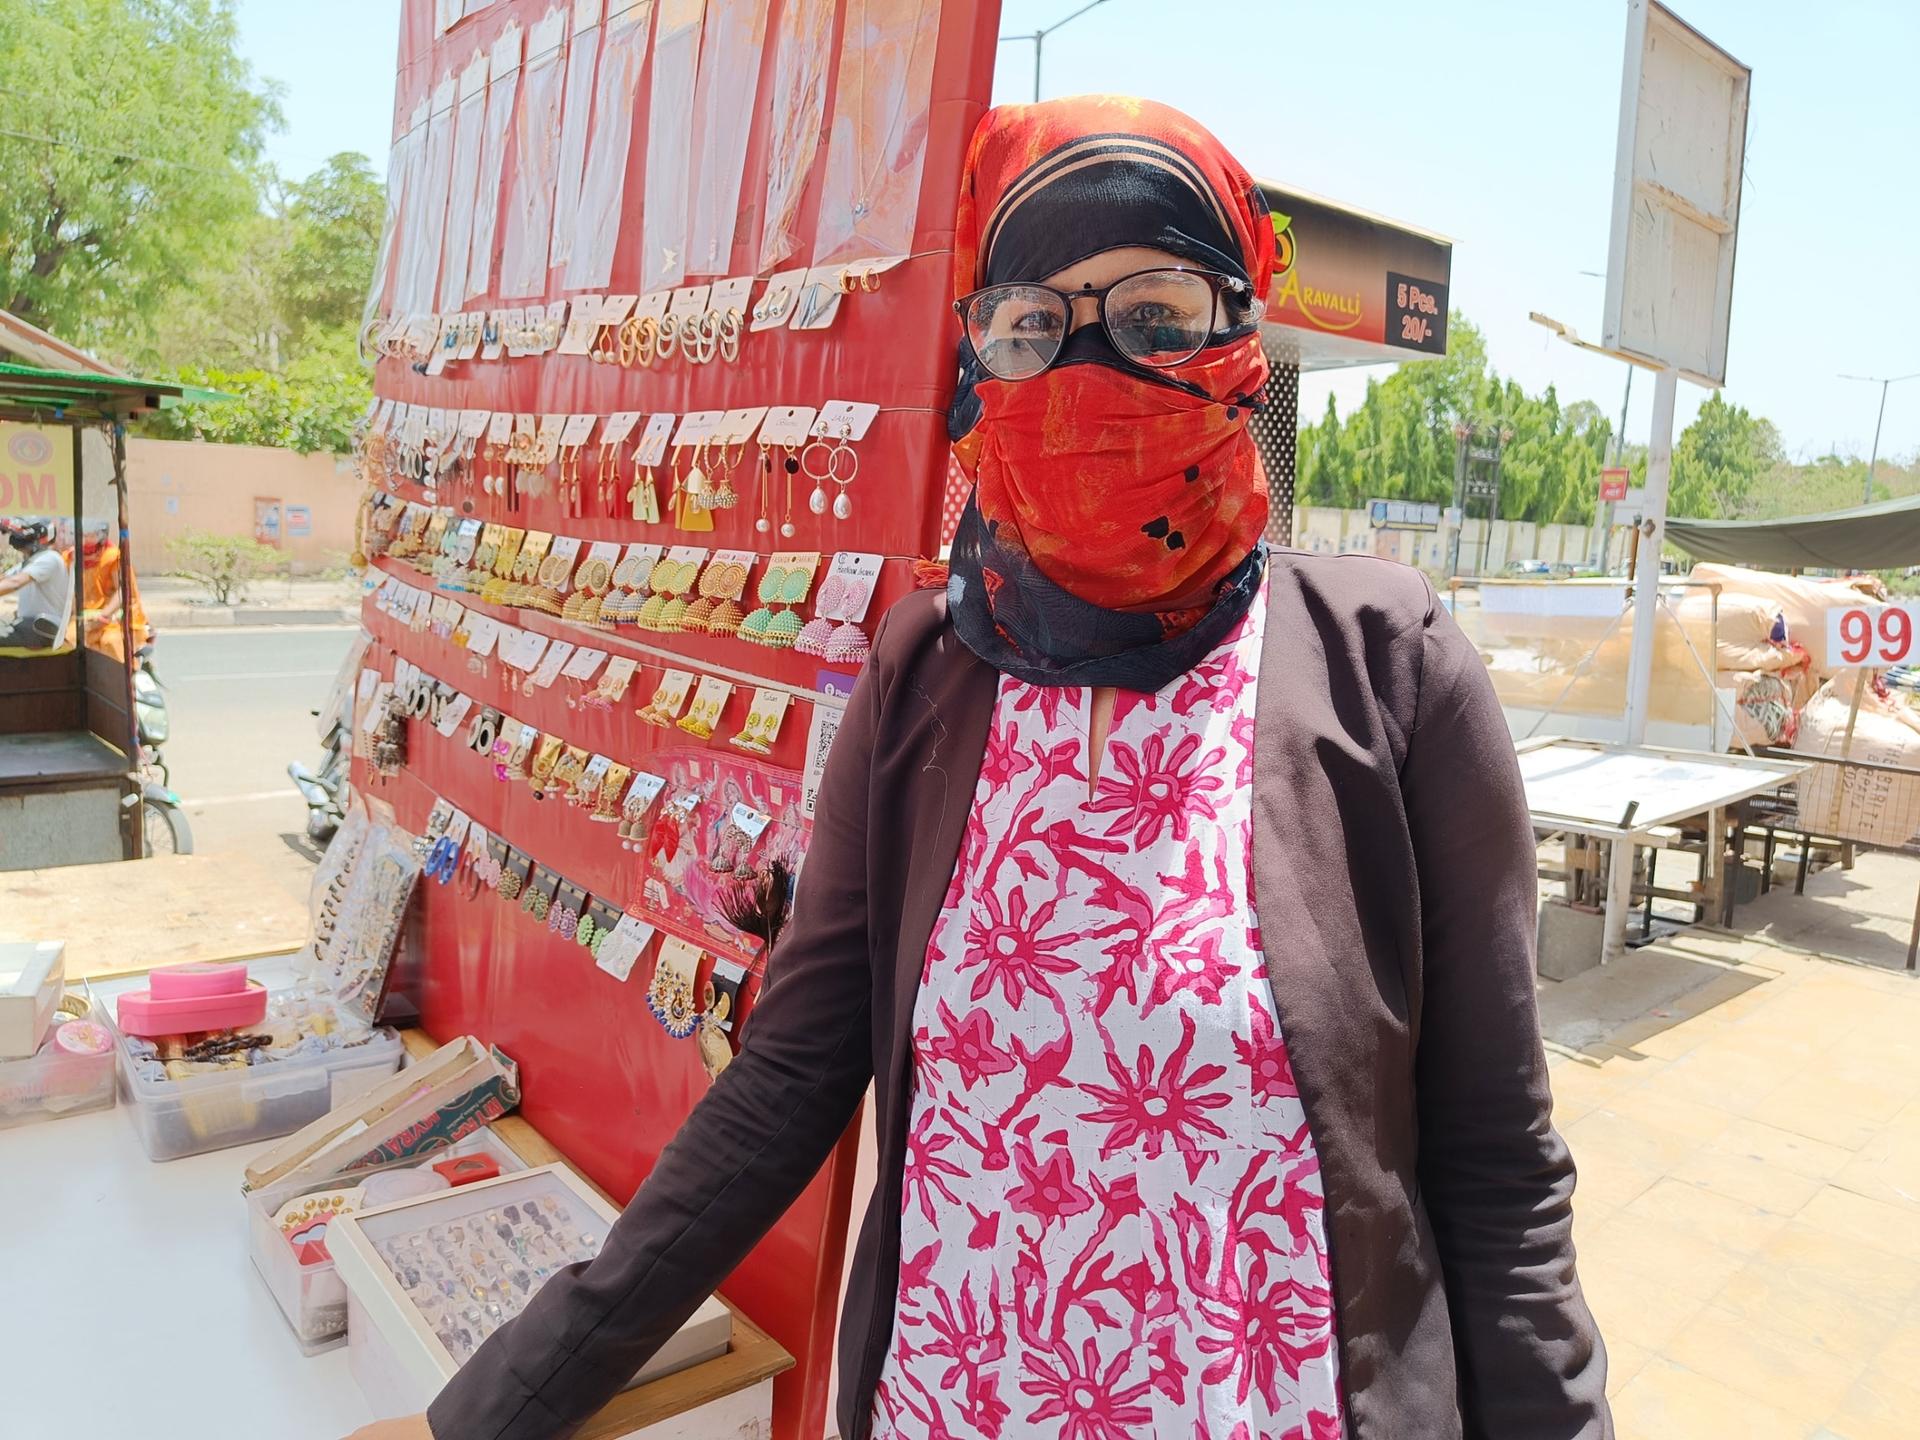 Jyoti Jain is one of the few shoppers at a market in Jaipur in northern India. She uses a face and head covering and wears a full-sleeved shirt to protect herself amid a severe heatwave that's gripped India in recent weeks.